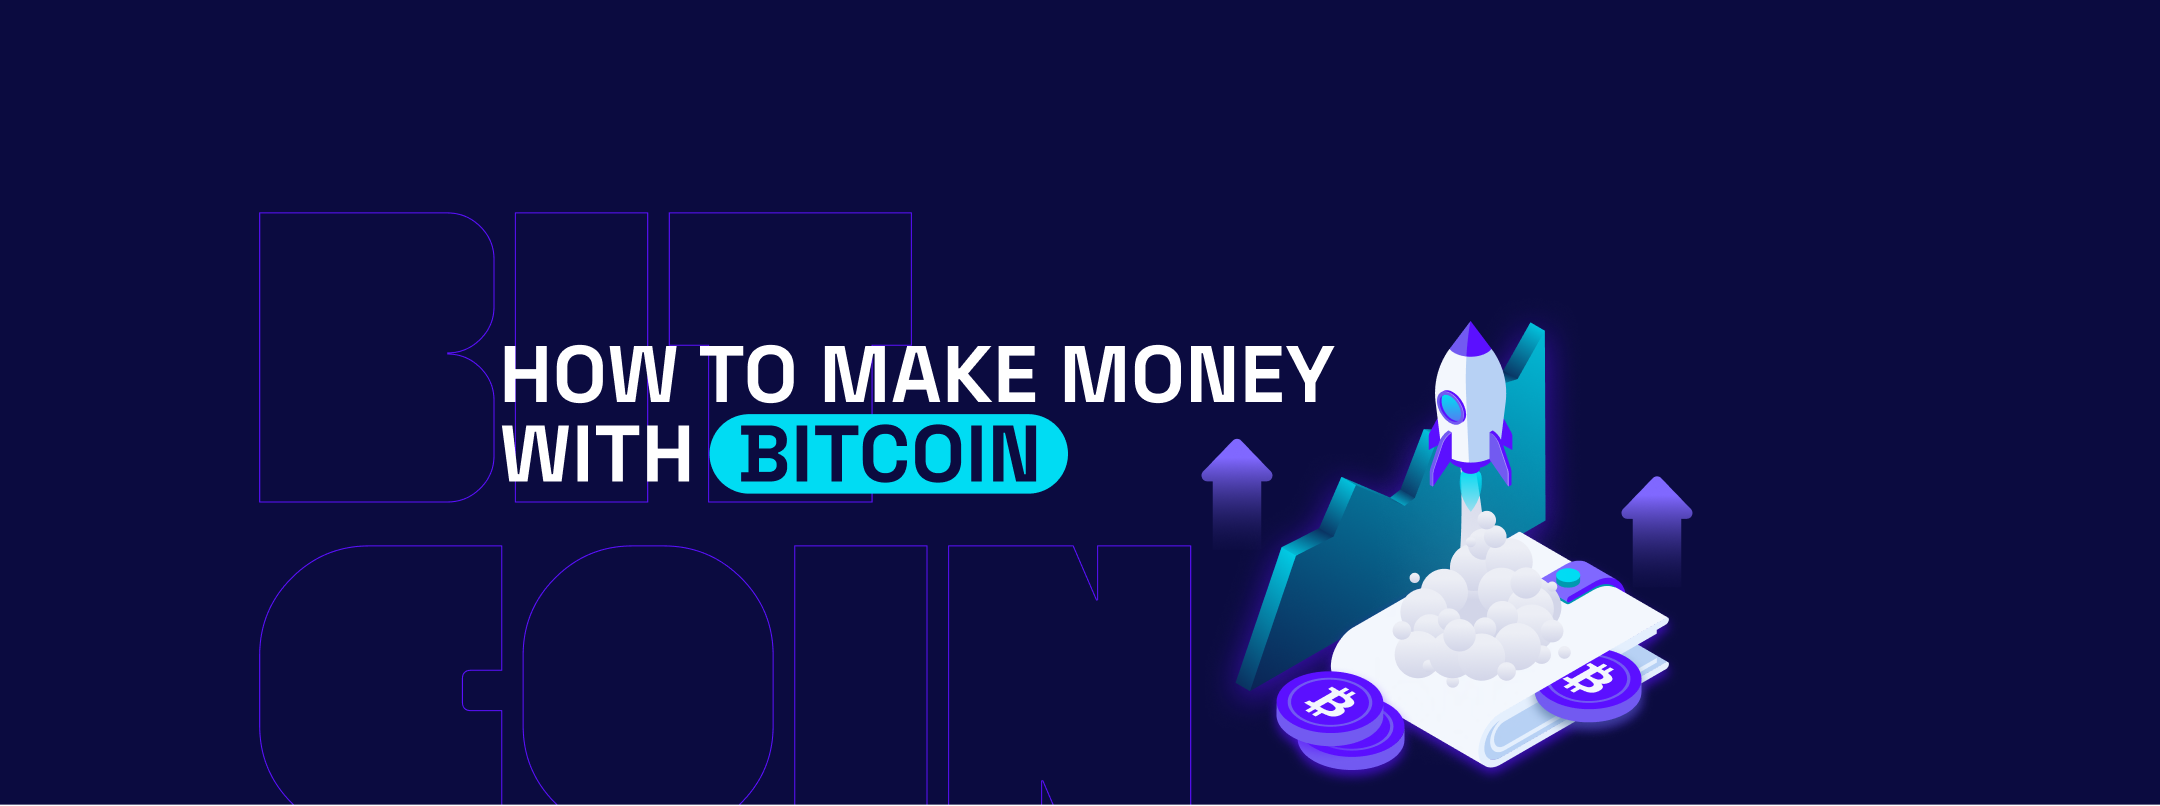 How To Make Money With Bitcoin (for Beginners)